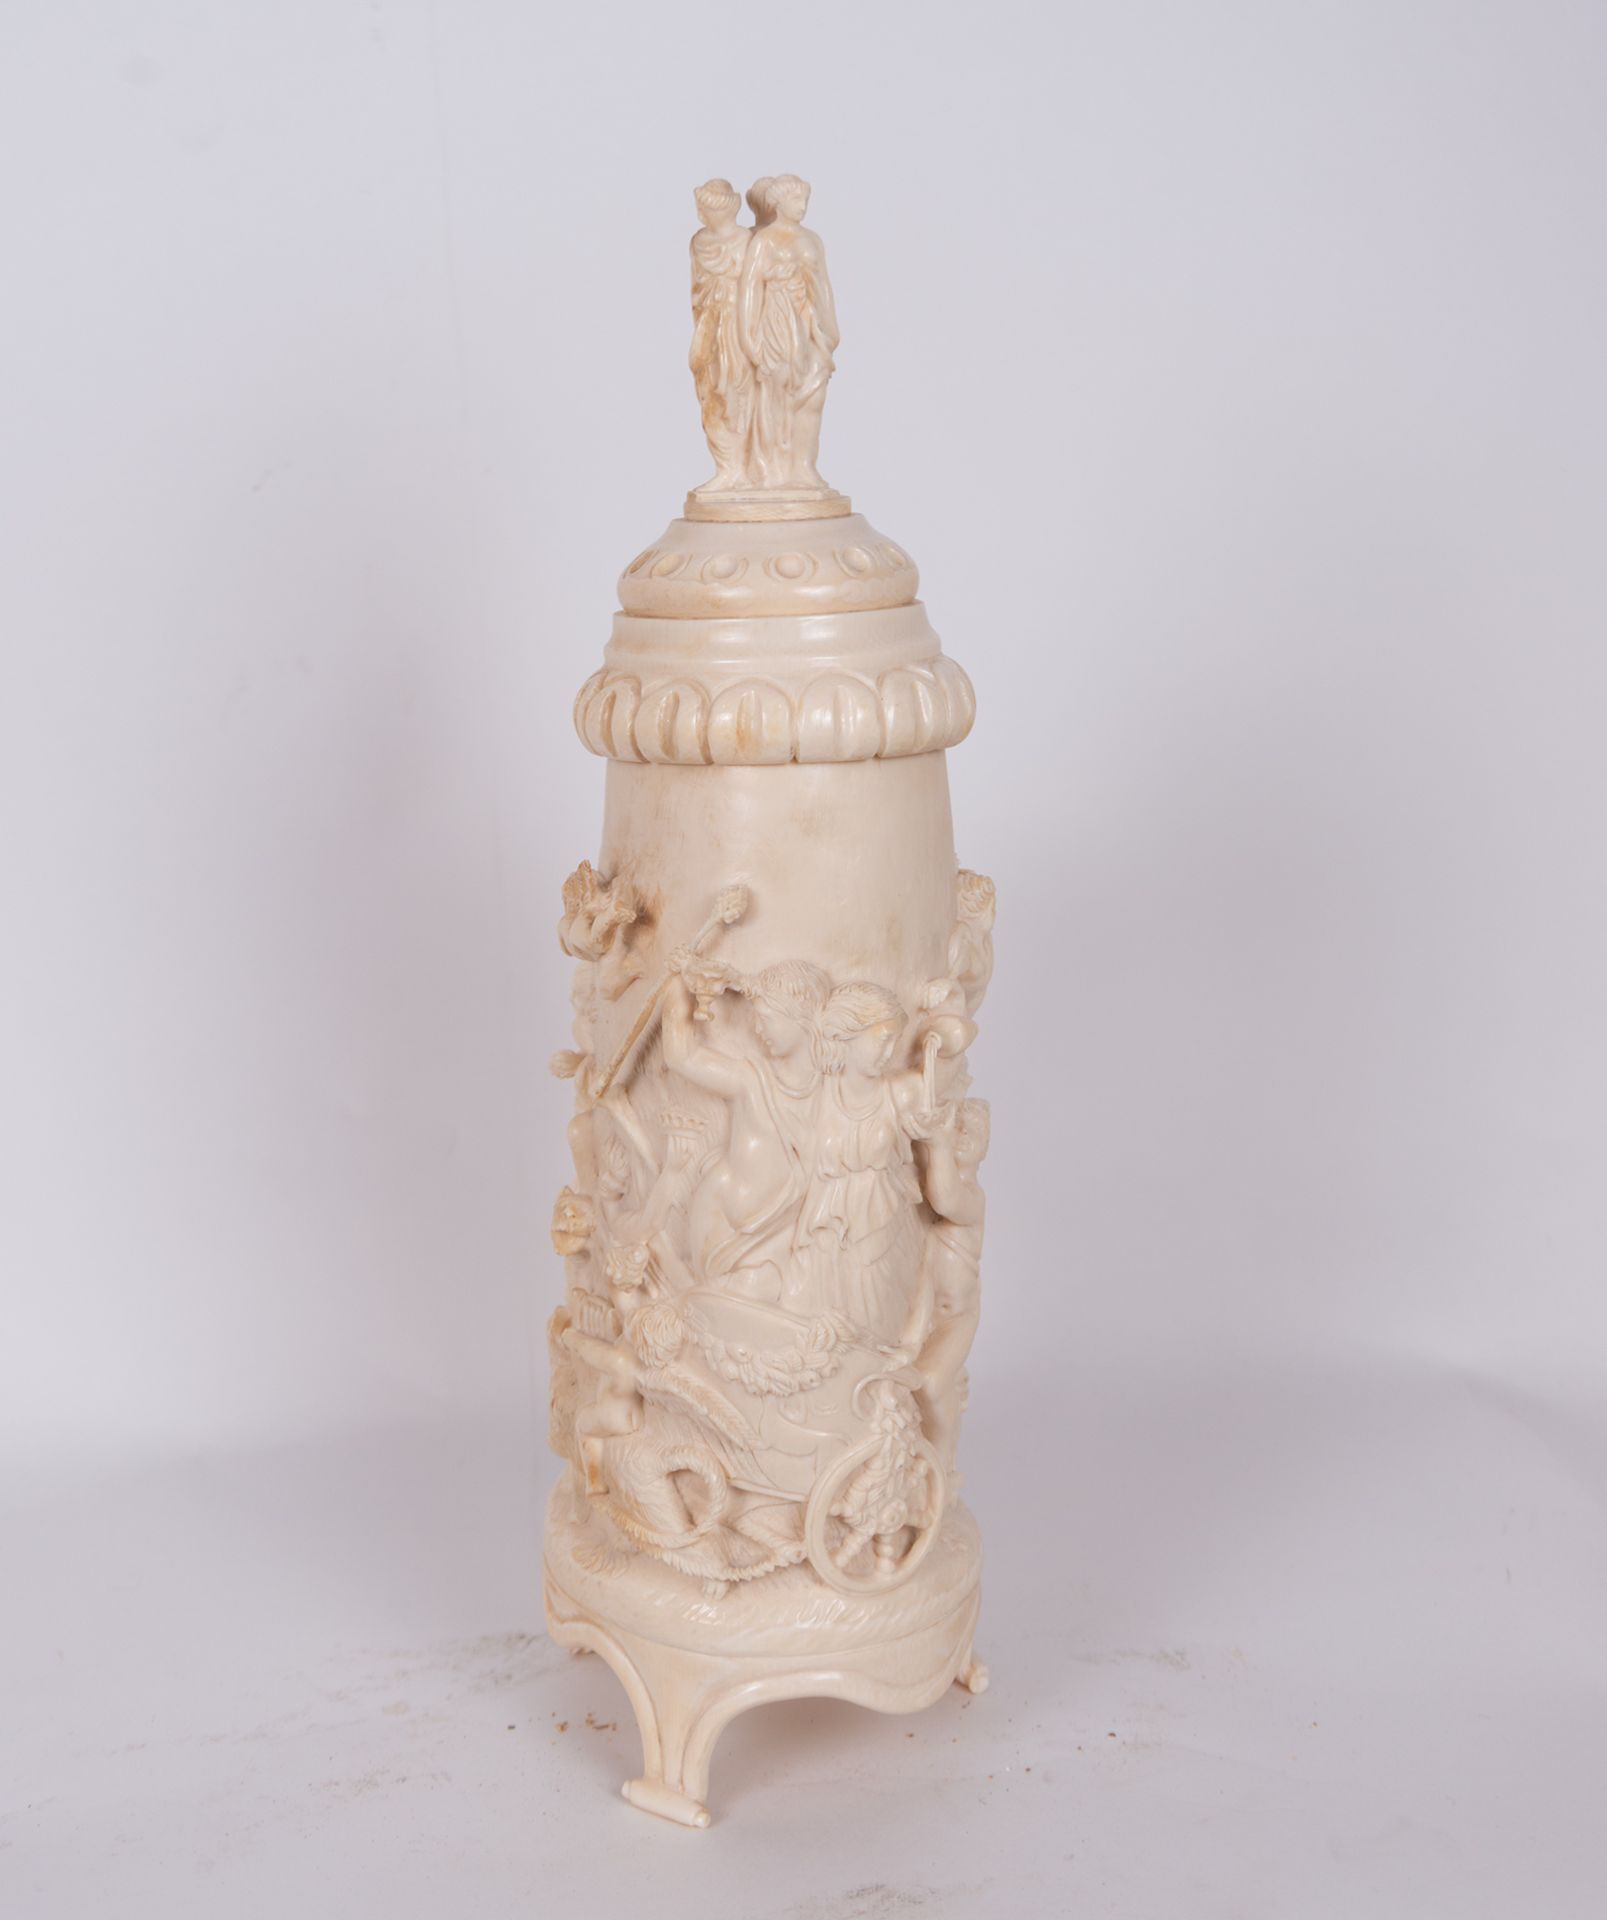 Important Tankard in ivory with mythological scene from the 19th century